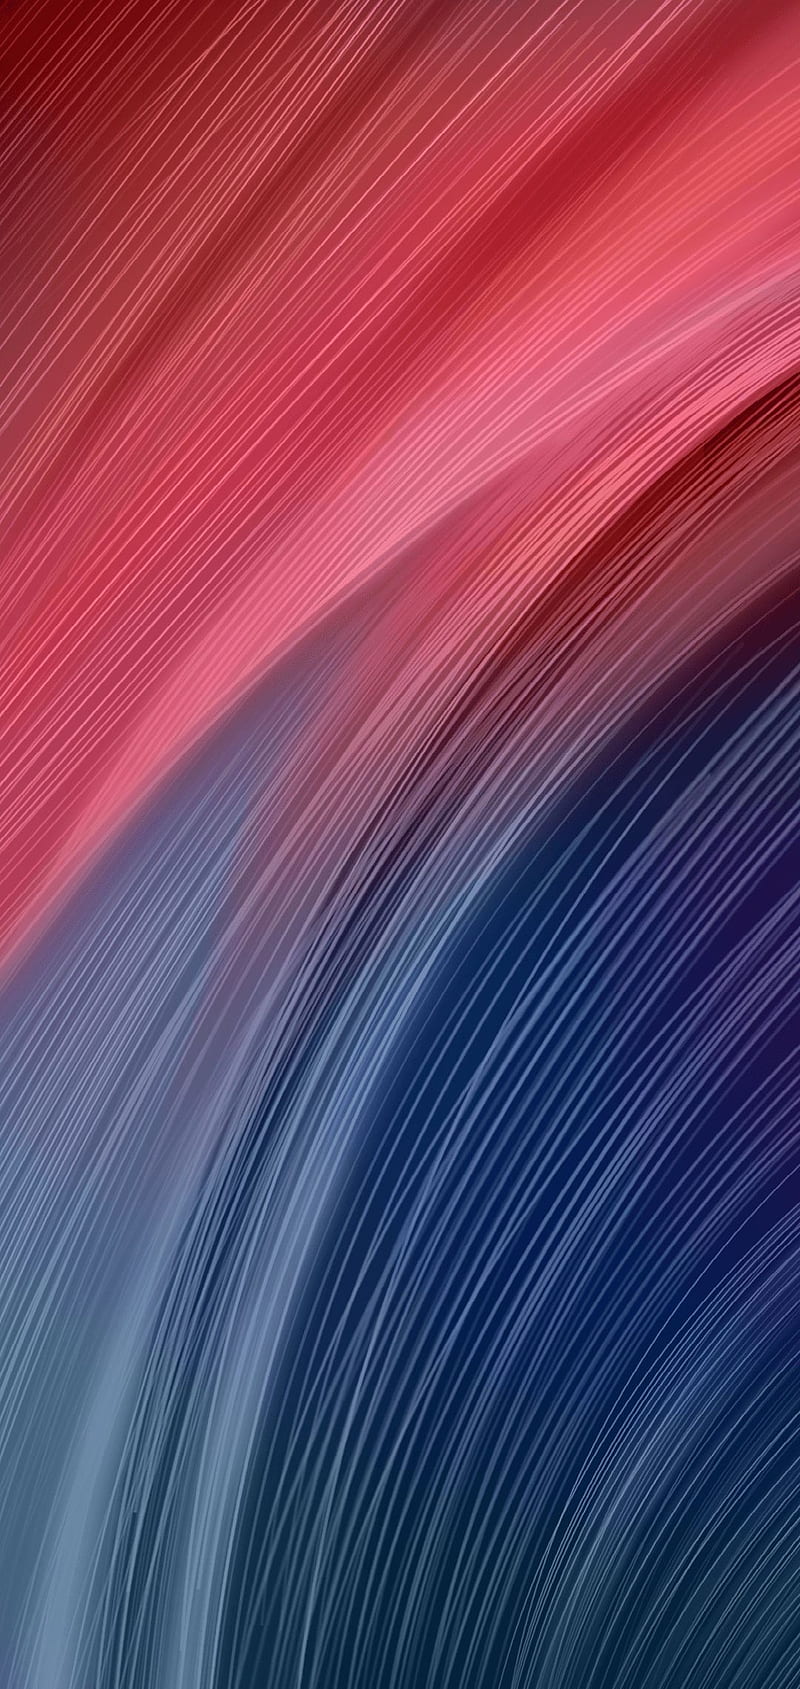 Redmi note 7, note, abstract, mix, colours, rainbow, HD phone wallpaper